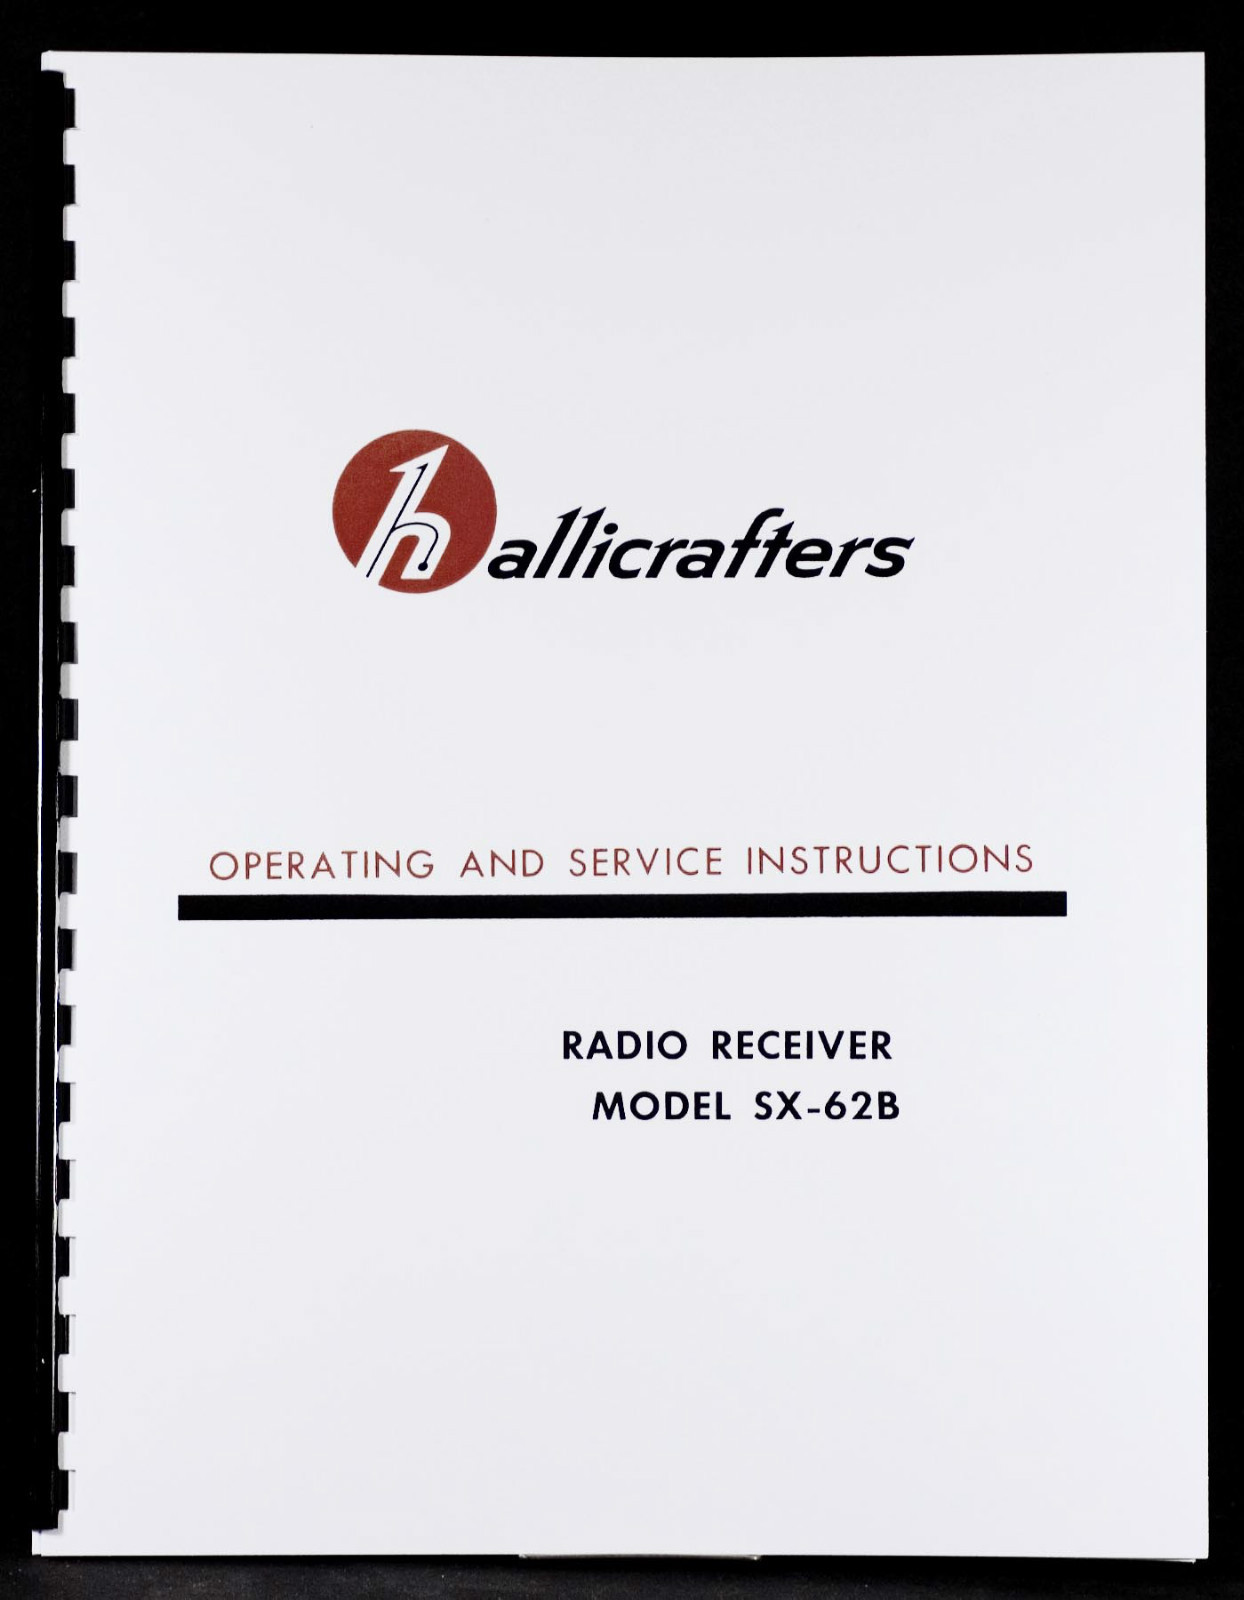 Hallicrafters s-40 manual